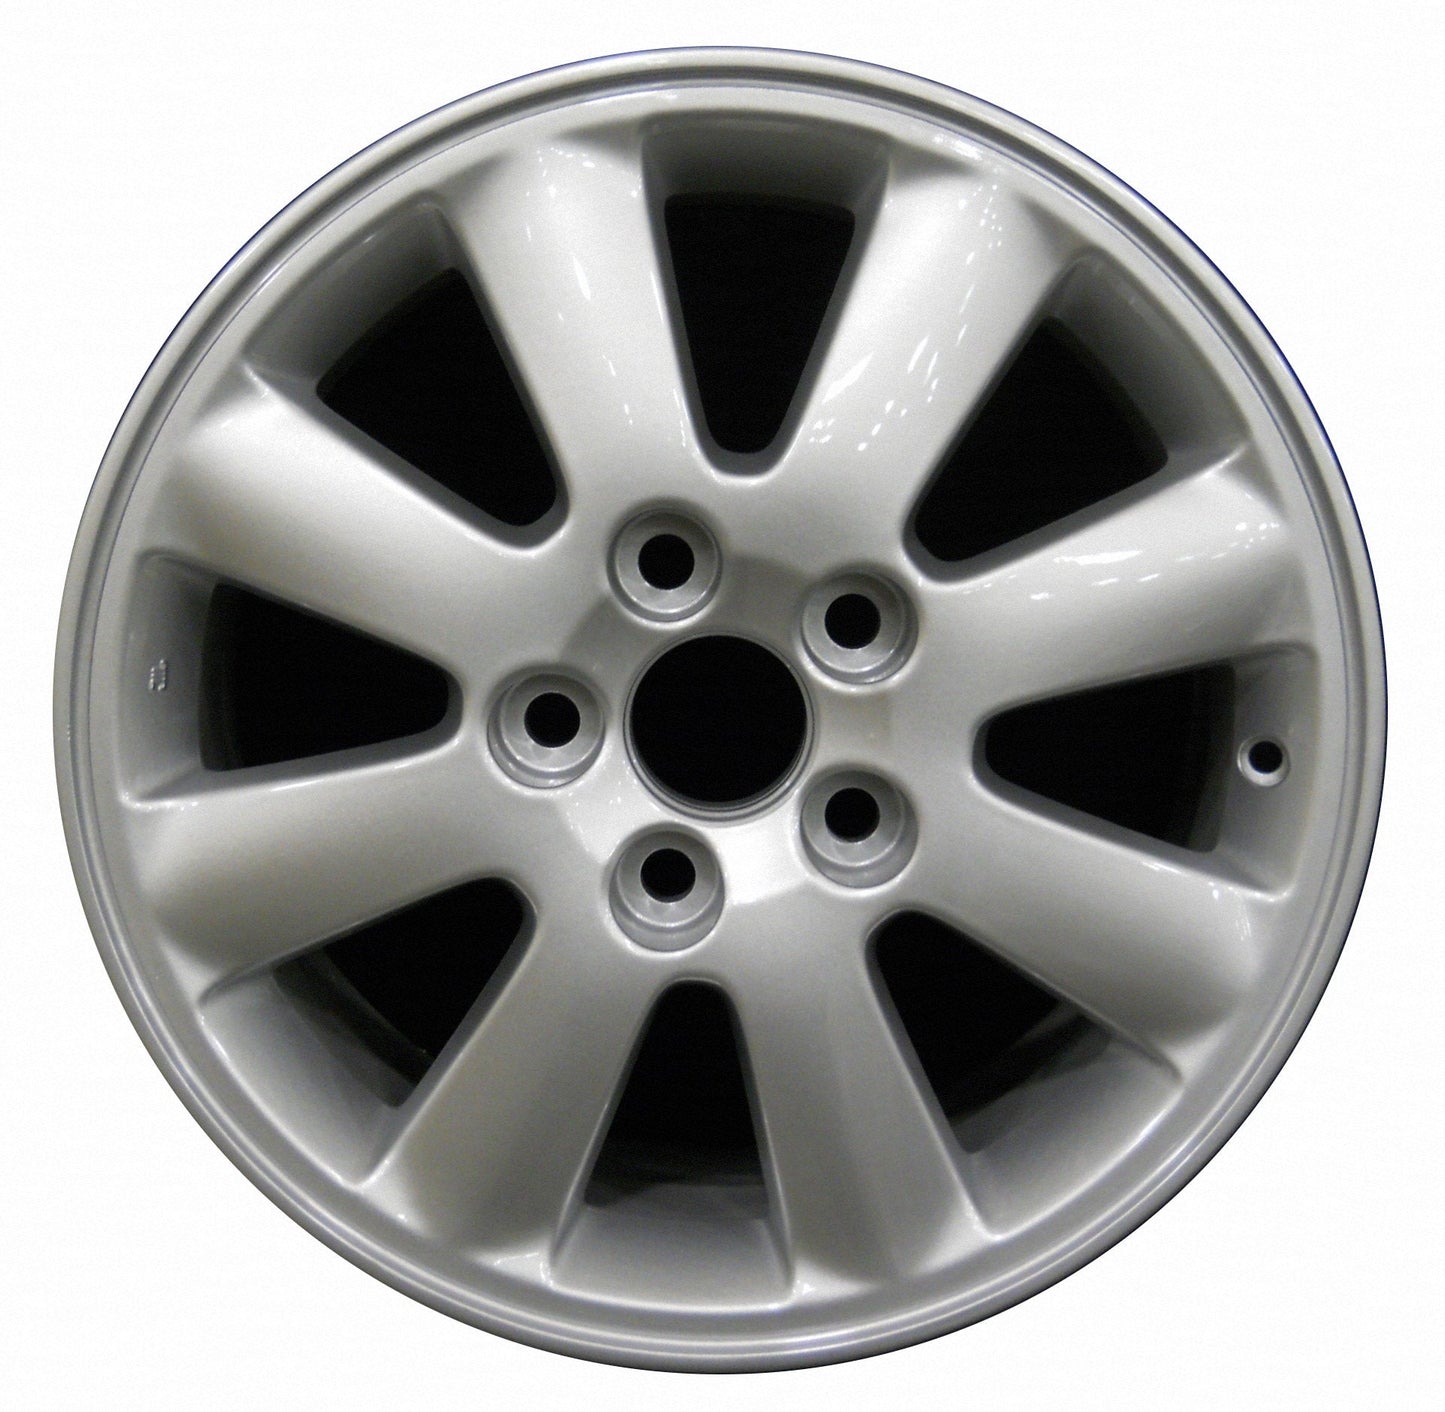 Toyota Camry  2002, 2003, 2004 Factory OEM Car Wheel Size 16x6.5 Alloy WAO.69417.LS03.FF